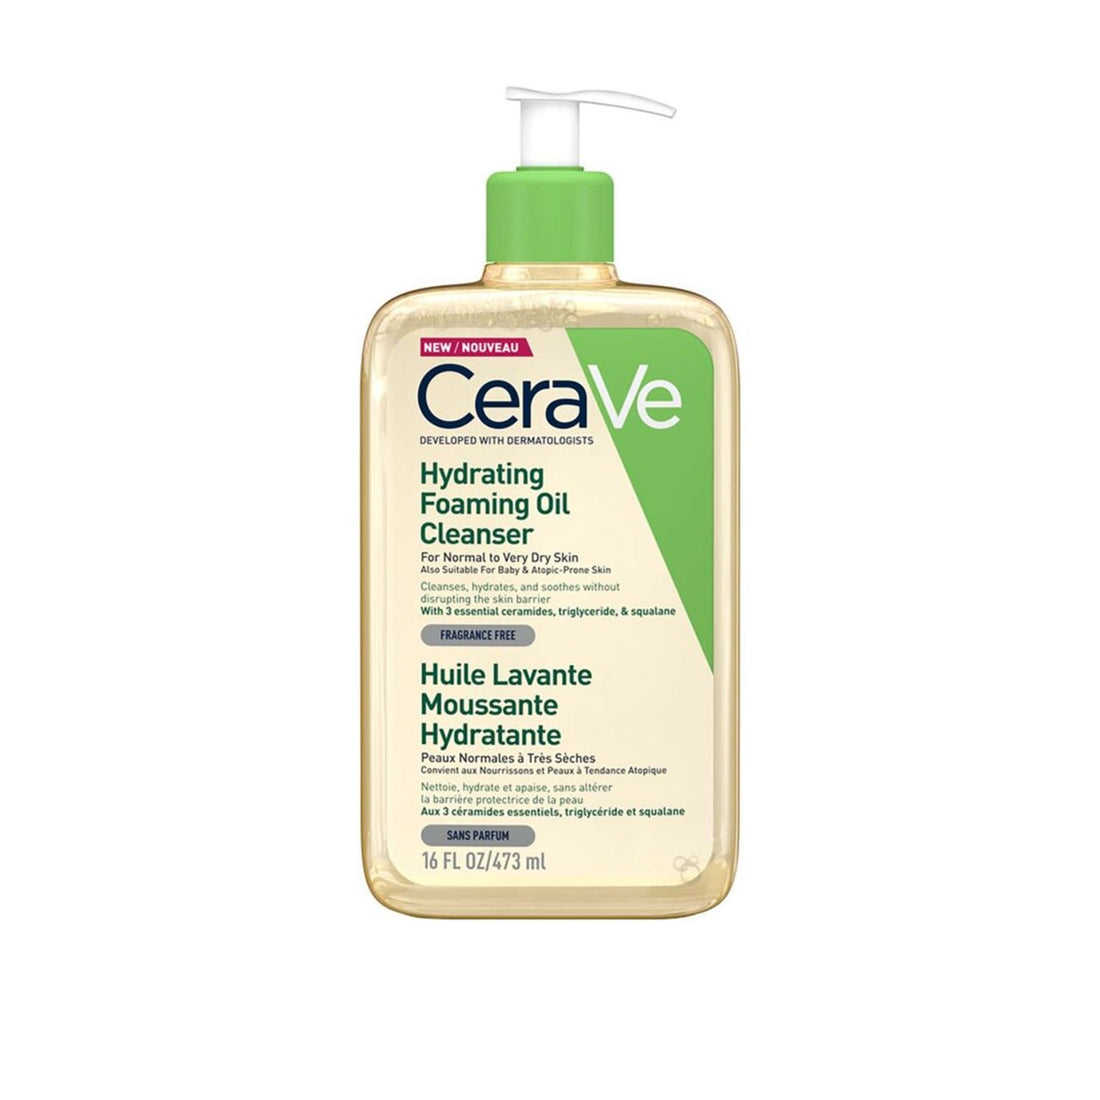 CeraVe Hydrating Foaming Oil Cleanser (473ml)